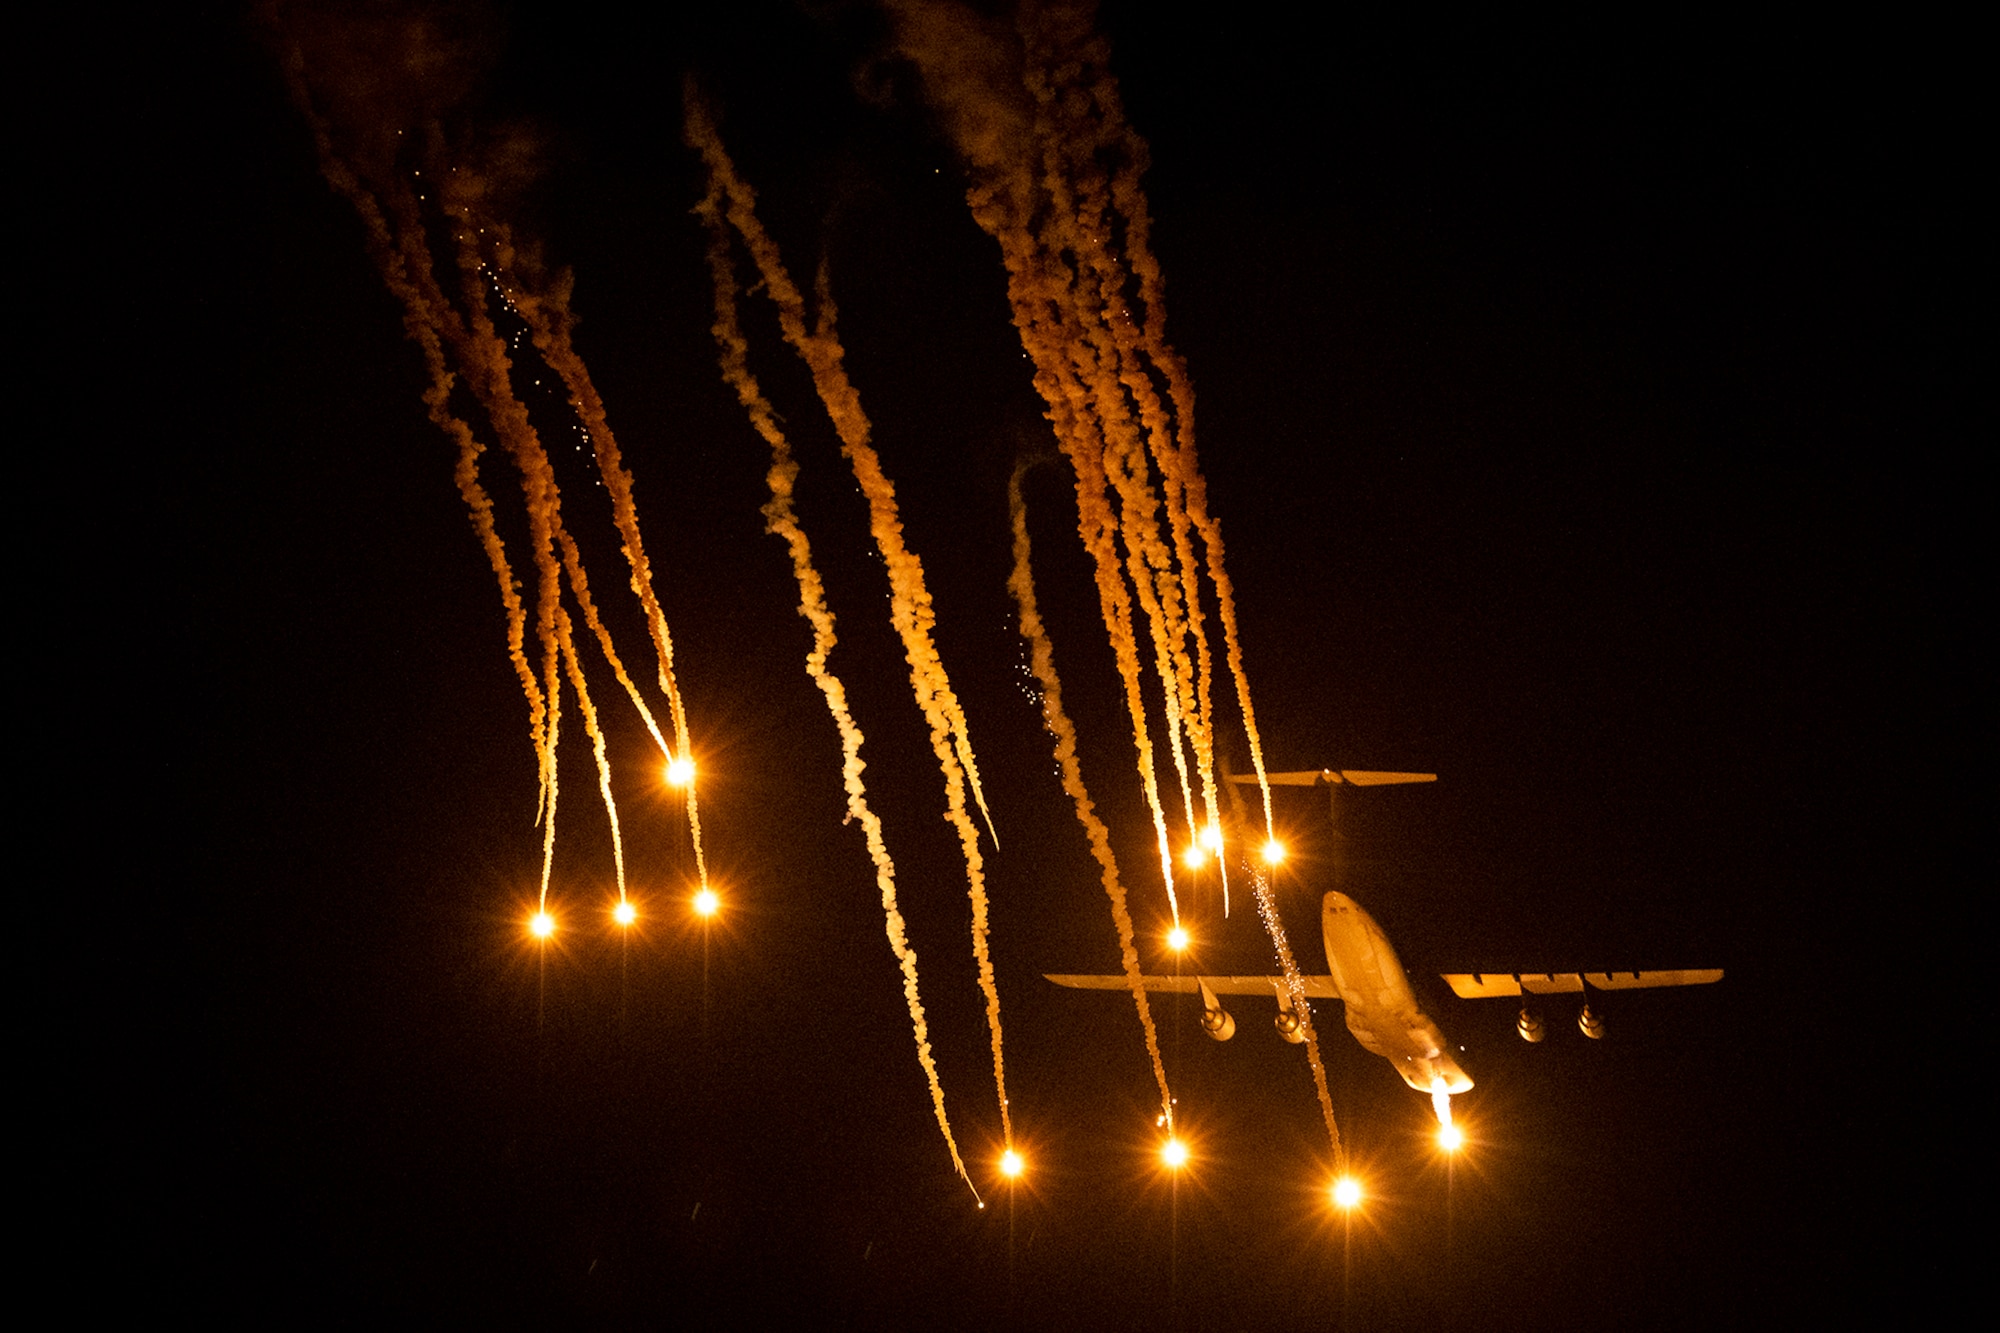 A 436th Airlift Wing C-5M Super Galaxy releases flares during a test May 12, 2021, at Eglin Air Force Base, Fla. The Dover AFB aircraft and aircrew released the flares as part of a two-week defensive countermeasures test program with the 46th Test Squadron.